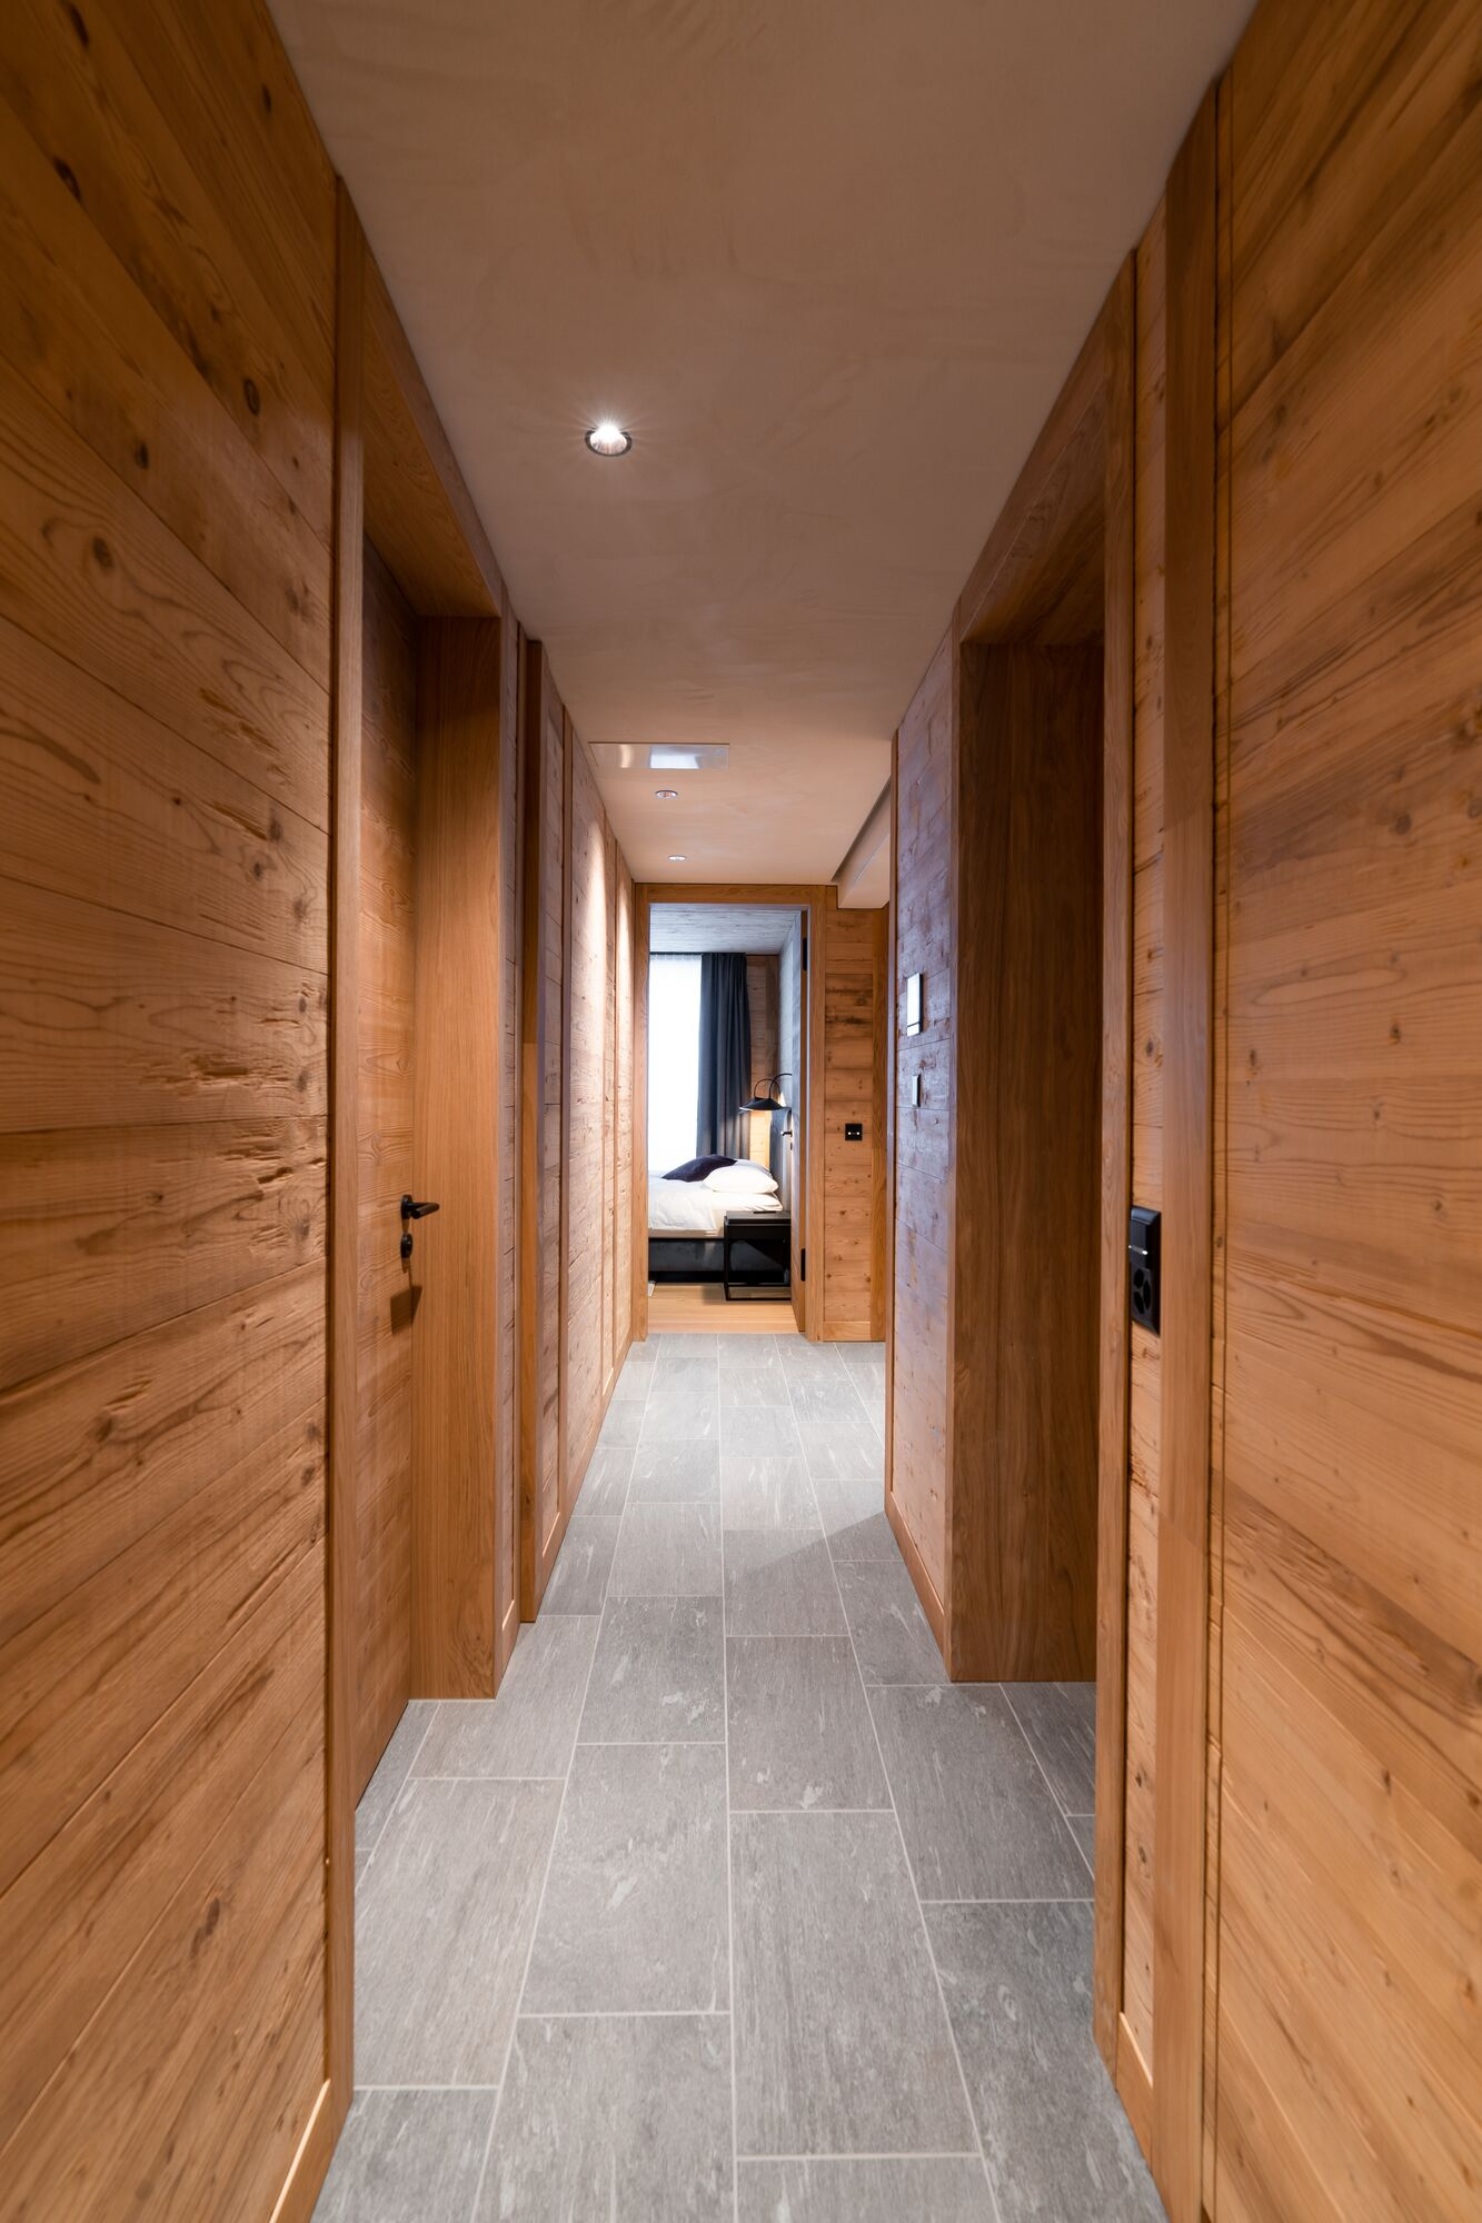 Apartment corridor with timber walls